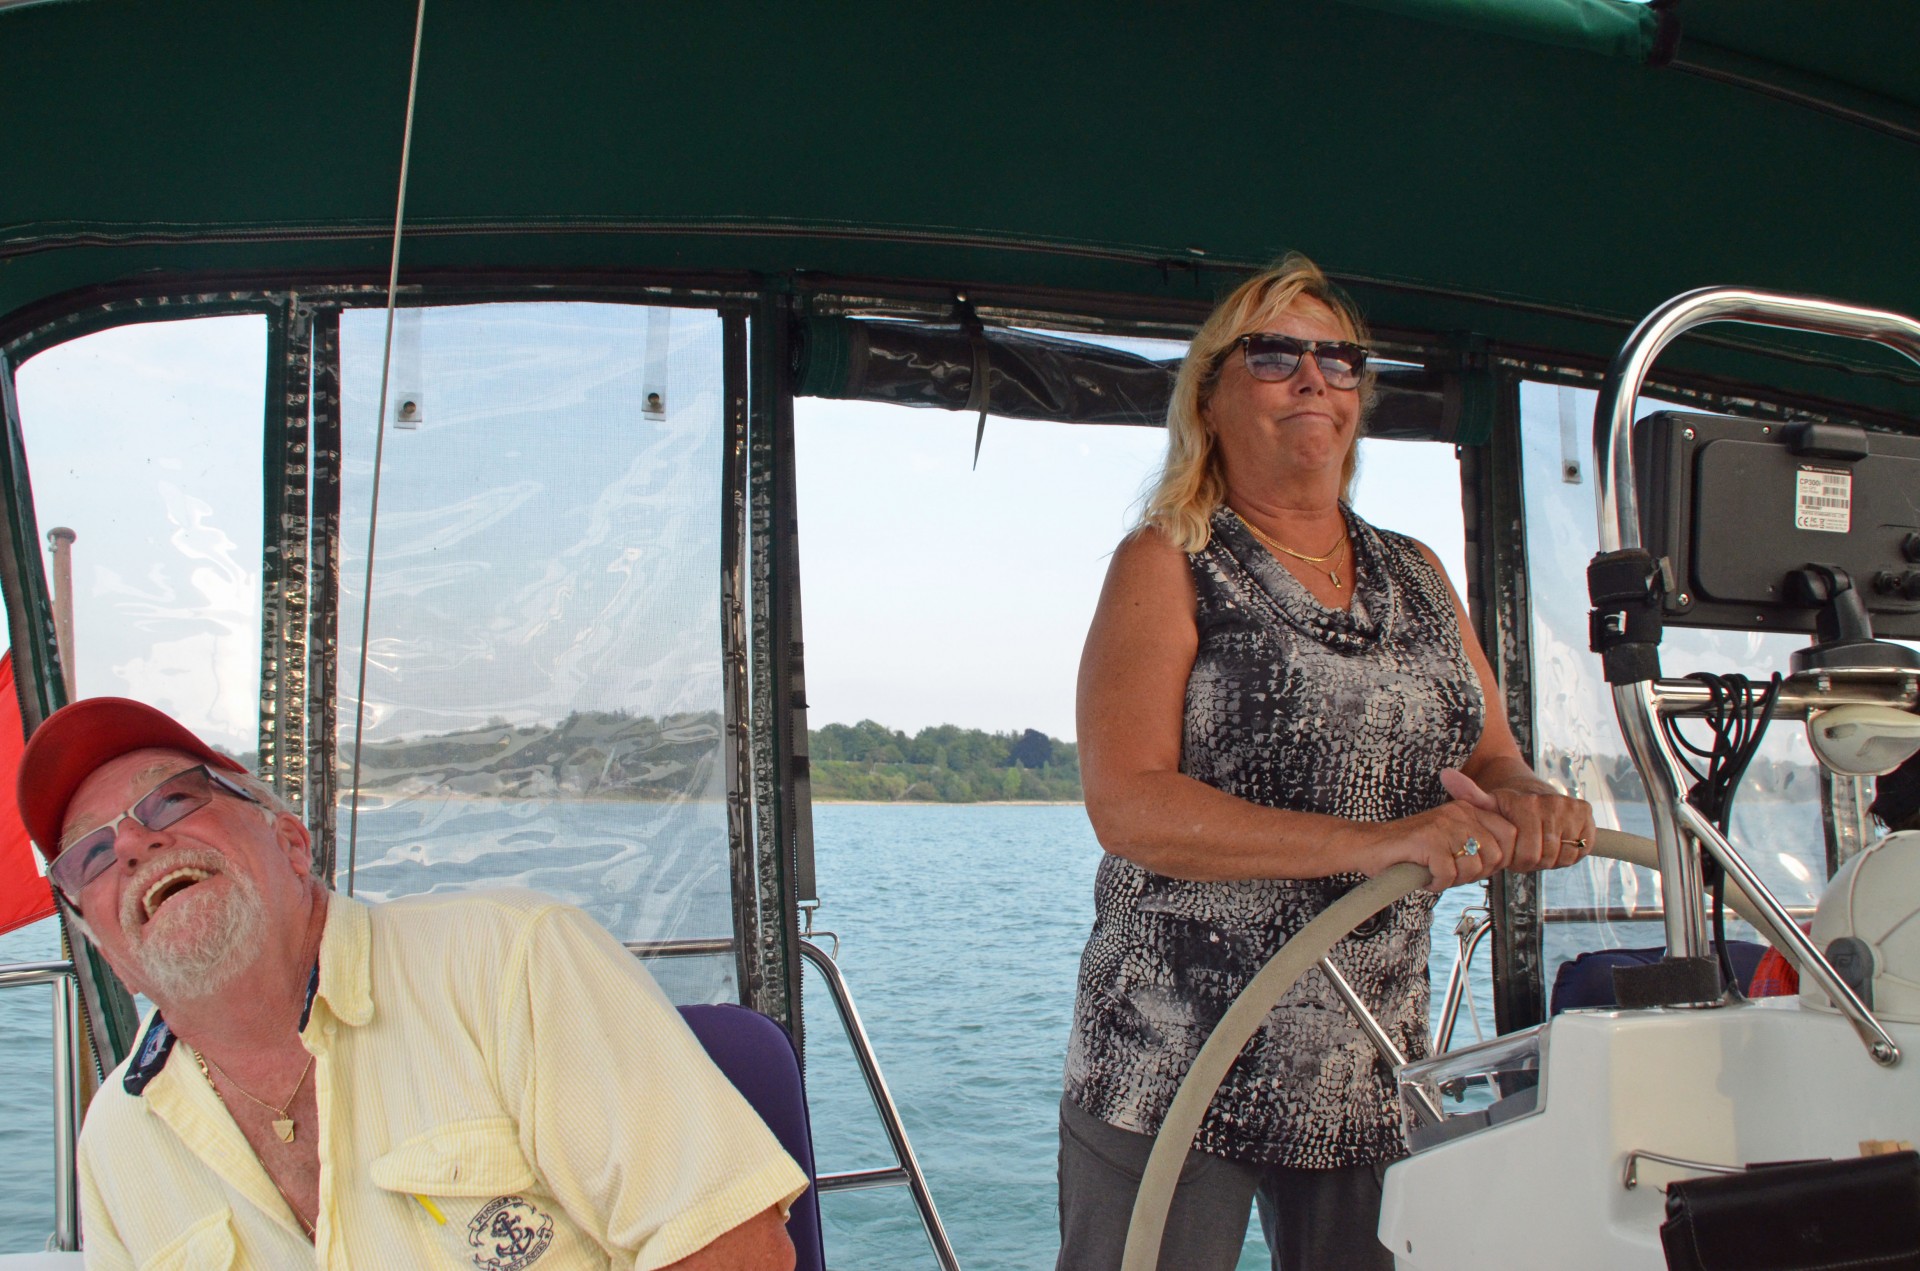 Lorraine at the Helm on Lake Huron